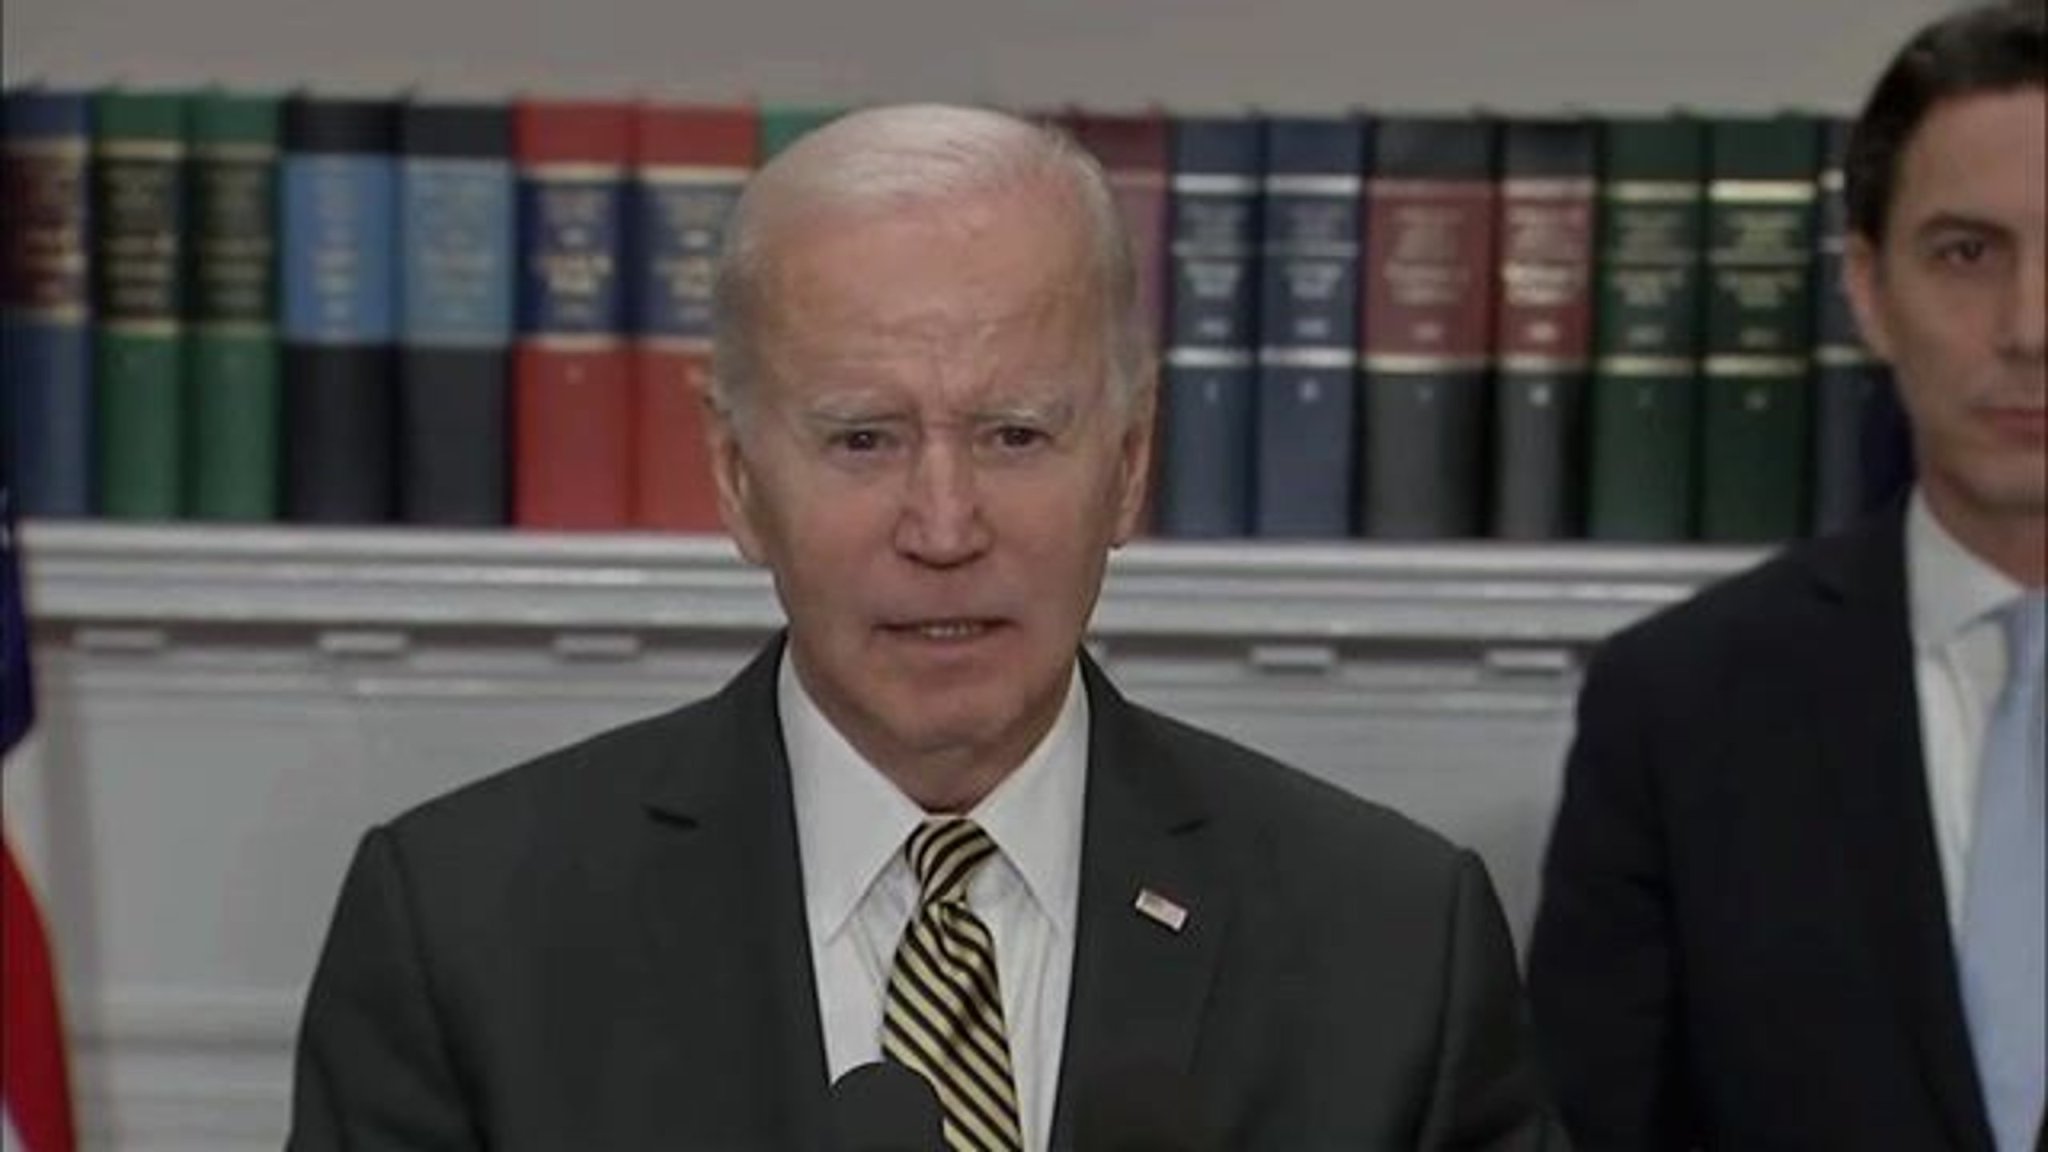 President Biden promotes his administration's record-high oil production numbers.